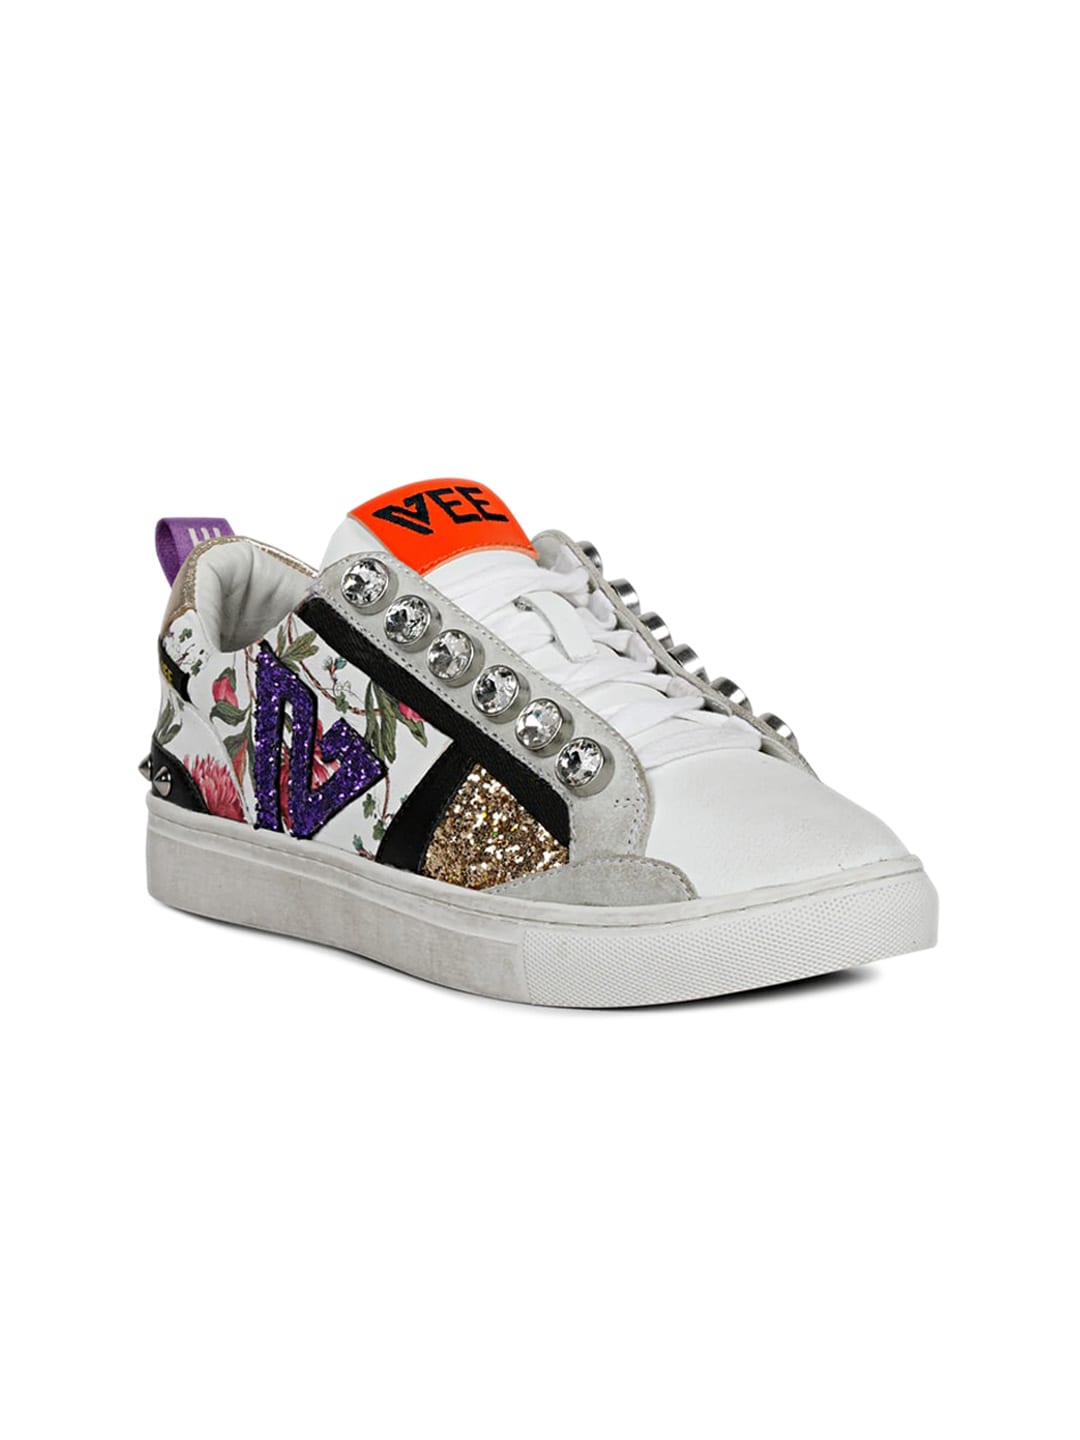 Saint G Women Printed Embellished Leather Sneakers Price in India